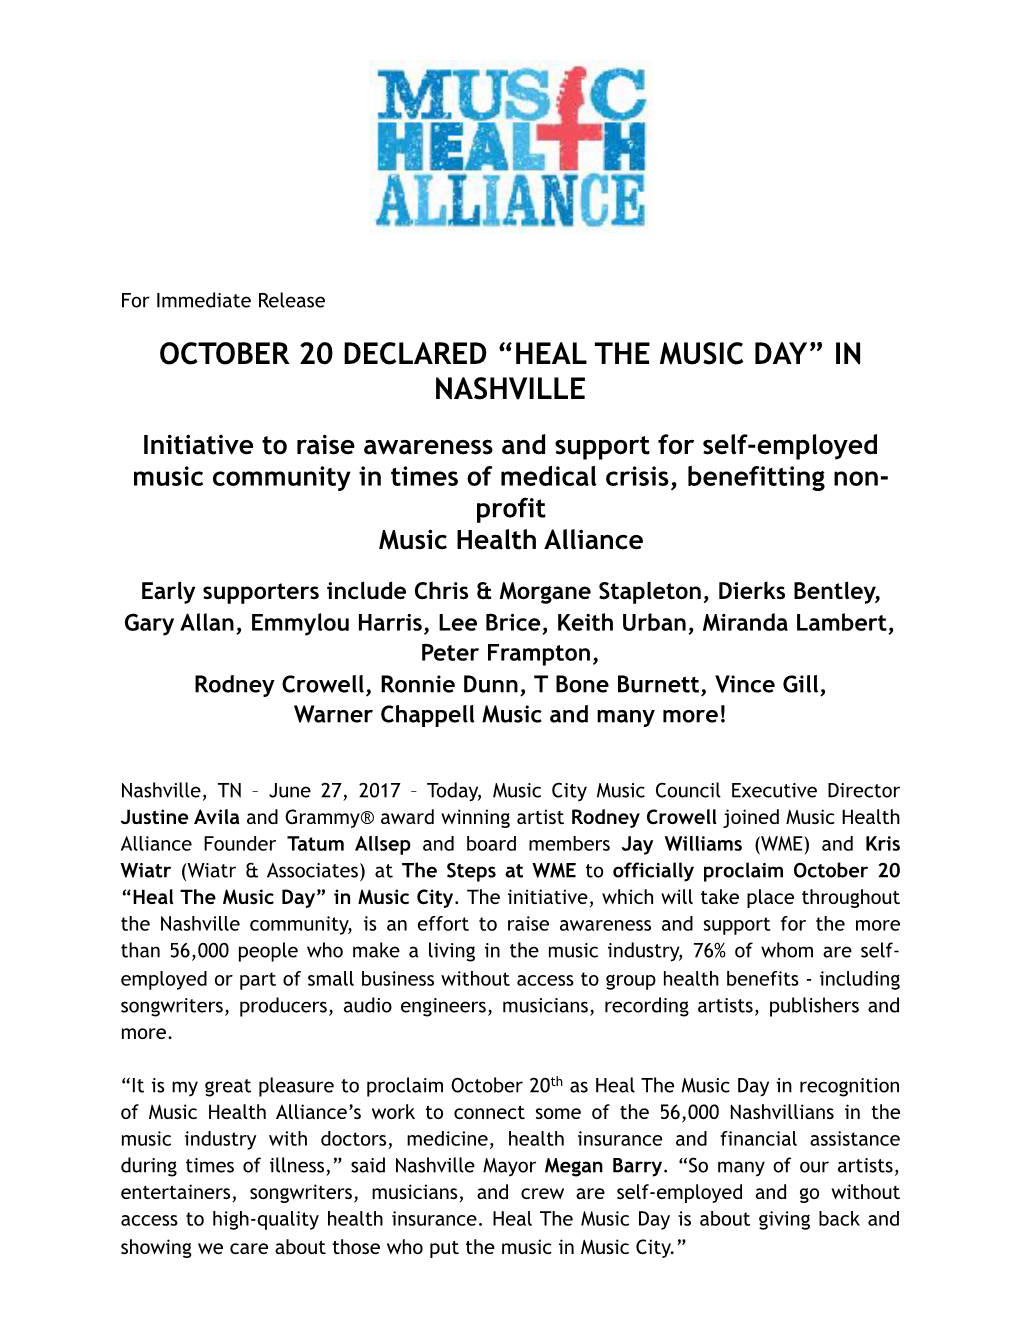 “Heal the Music Day” in Nashville